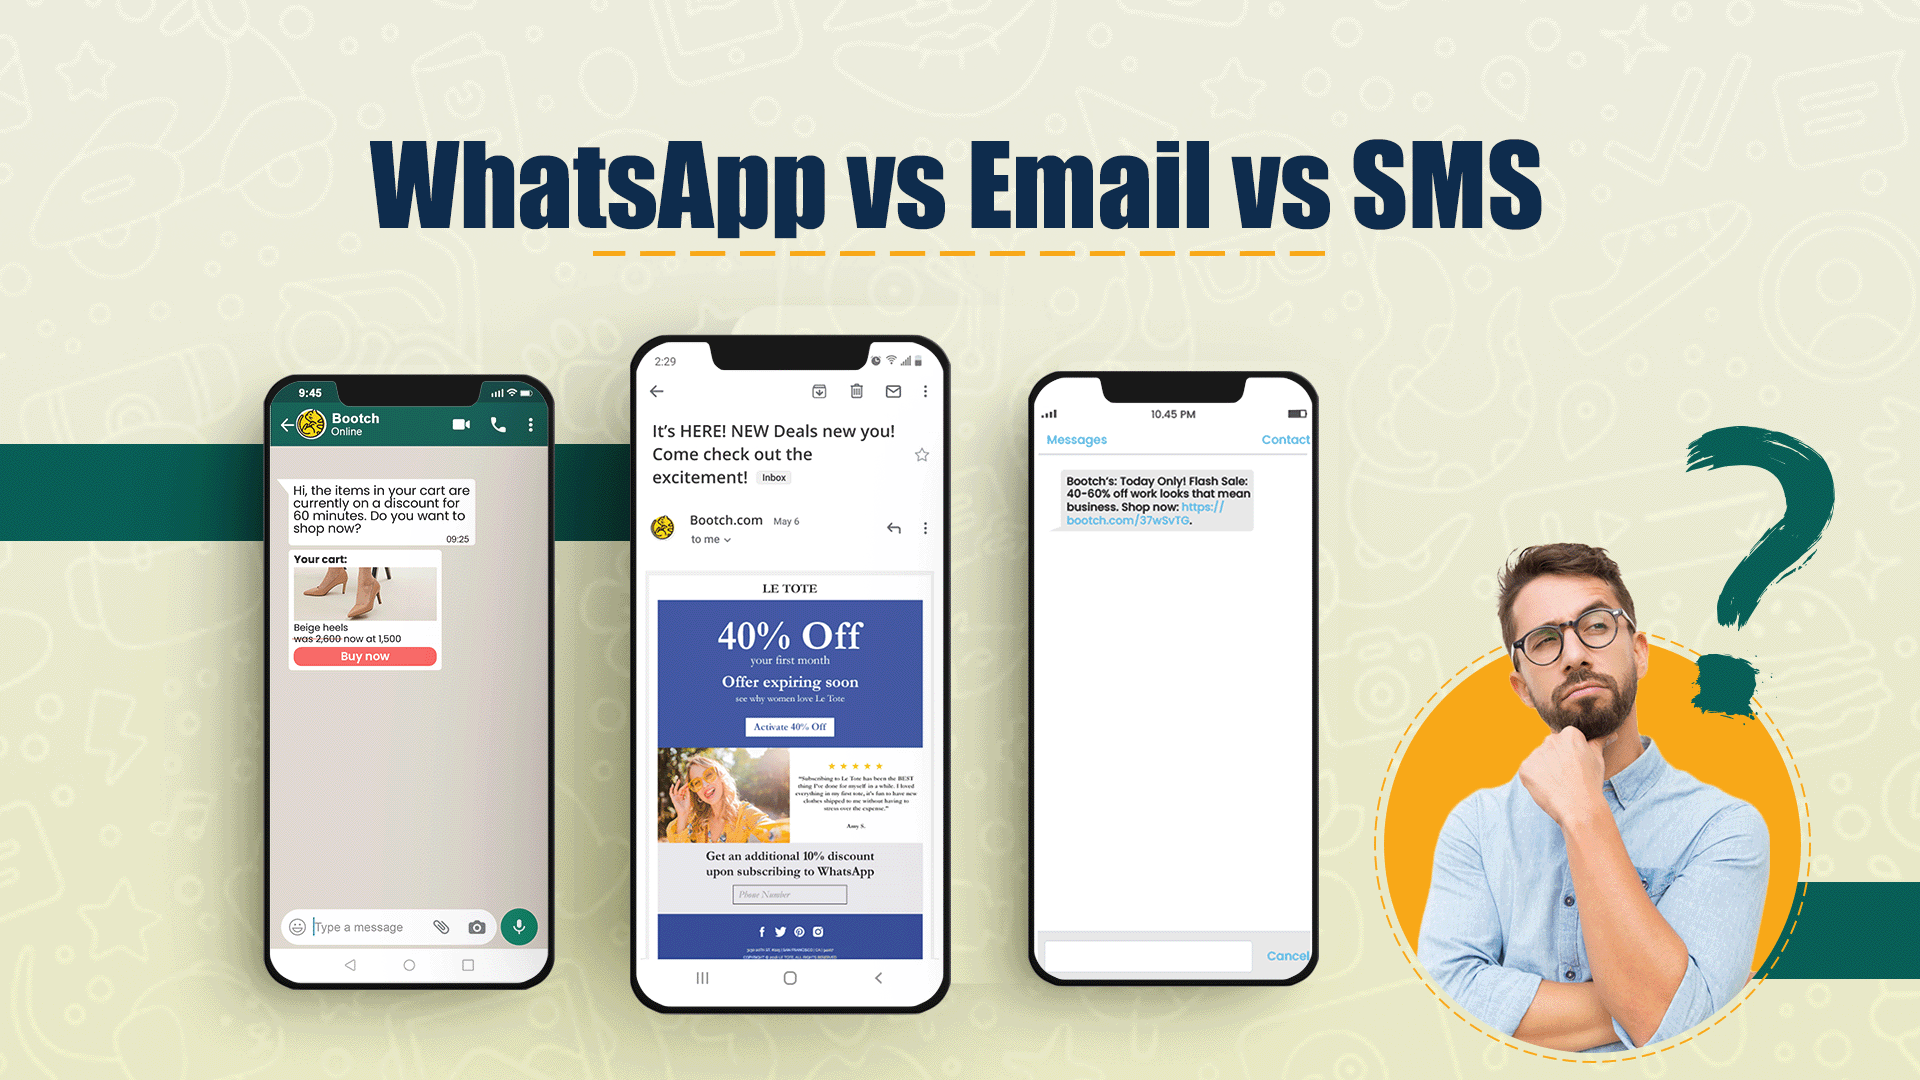 WhatsApp vs Email vs SMS: A marketer’s choice